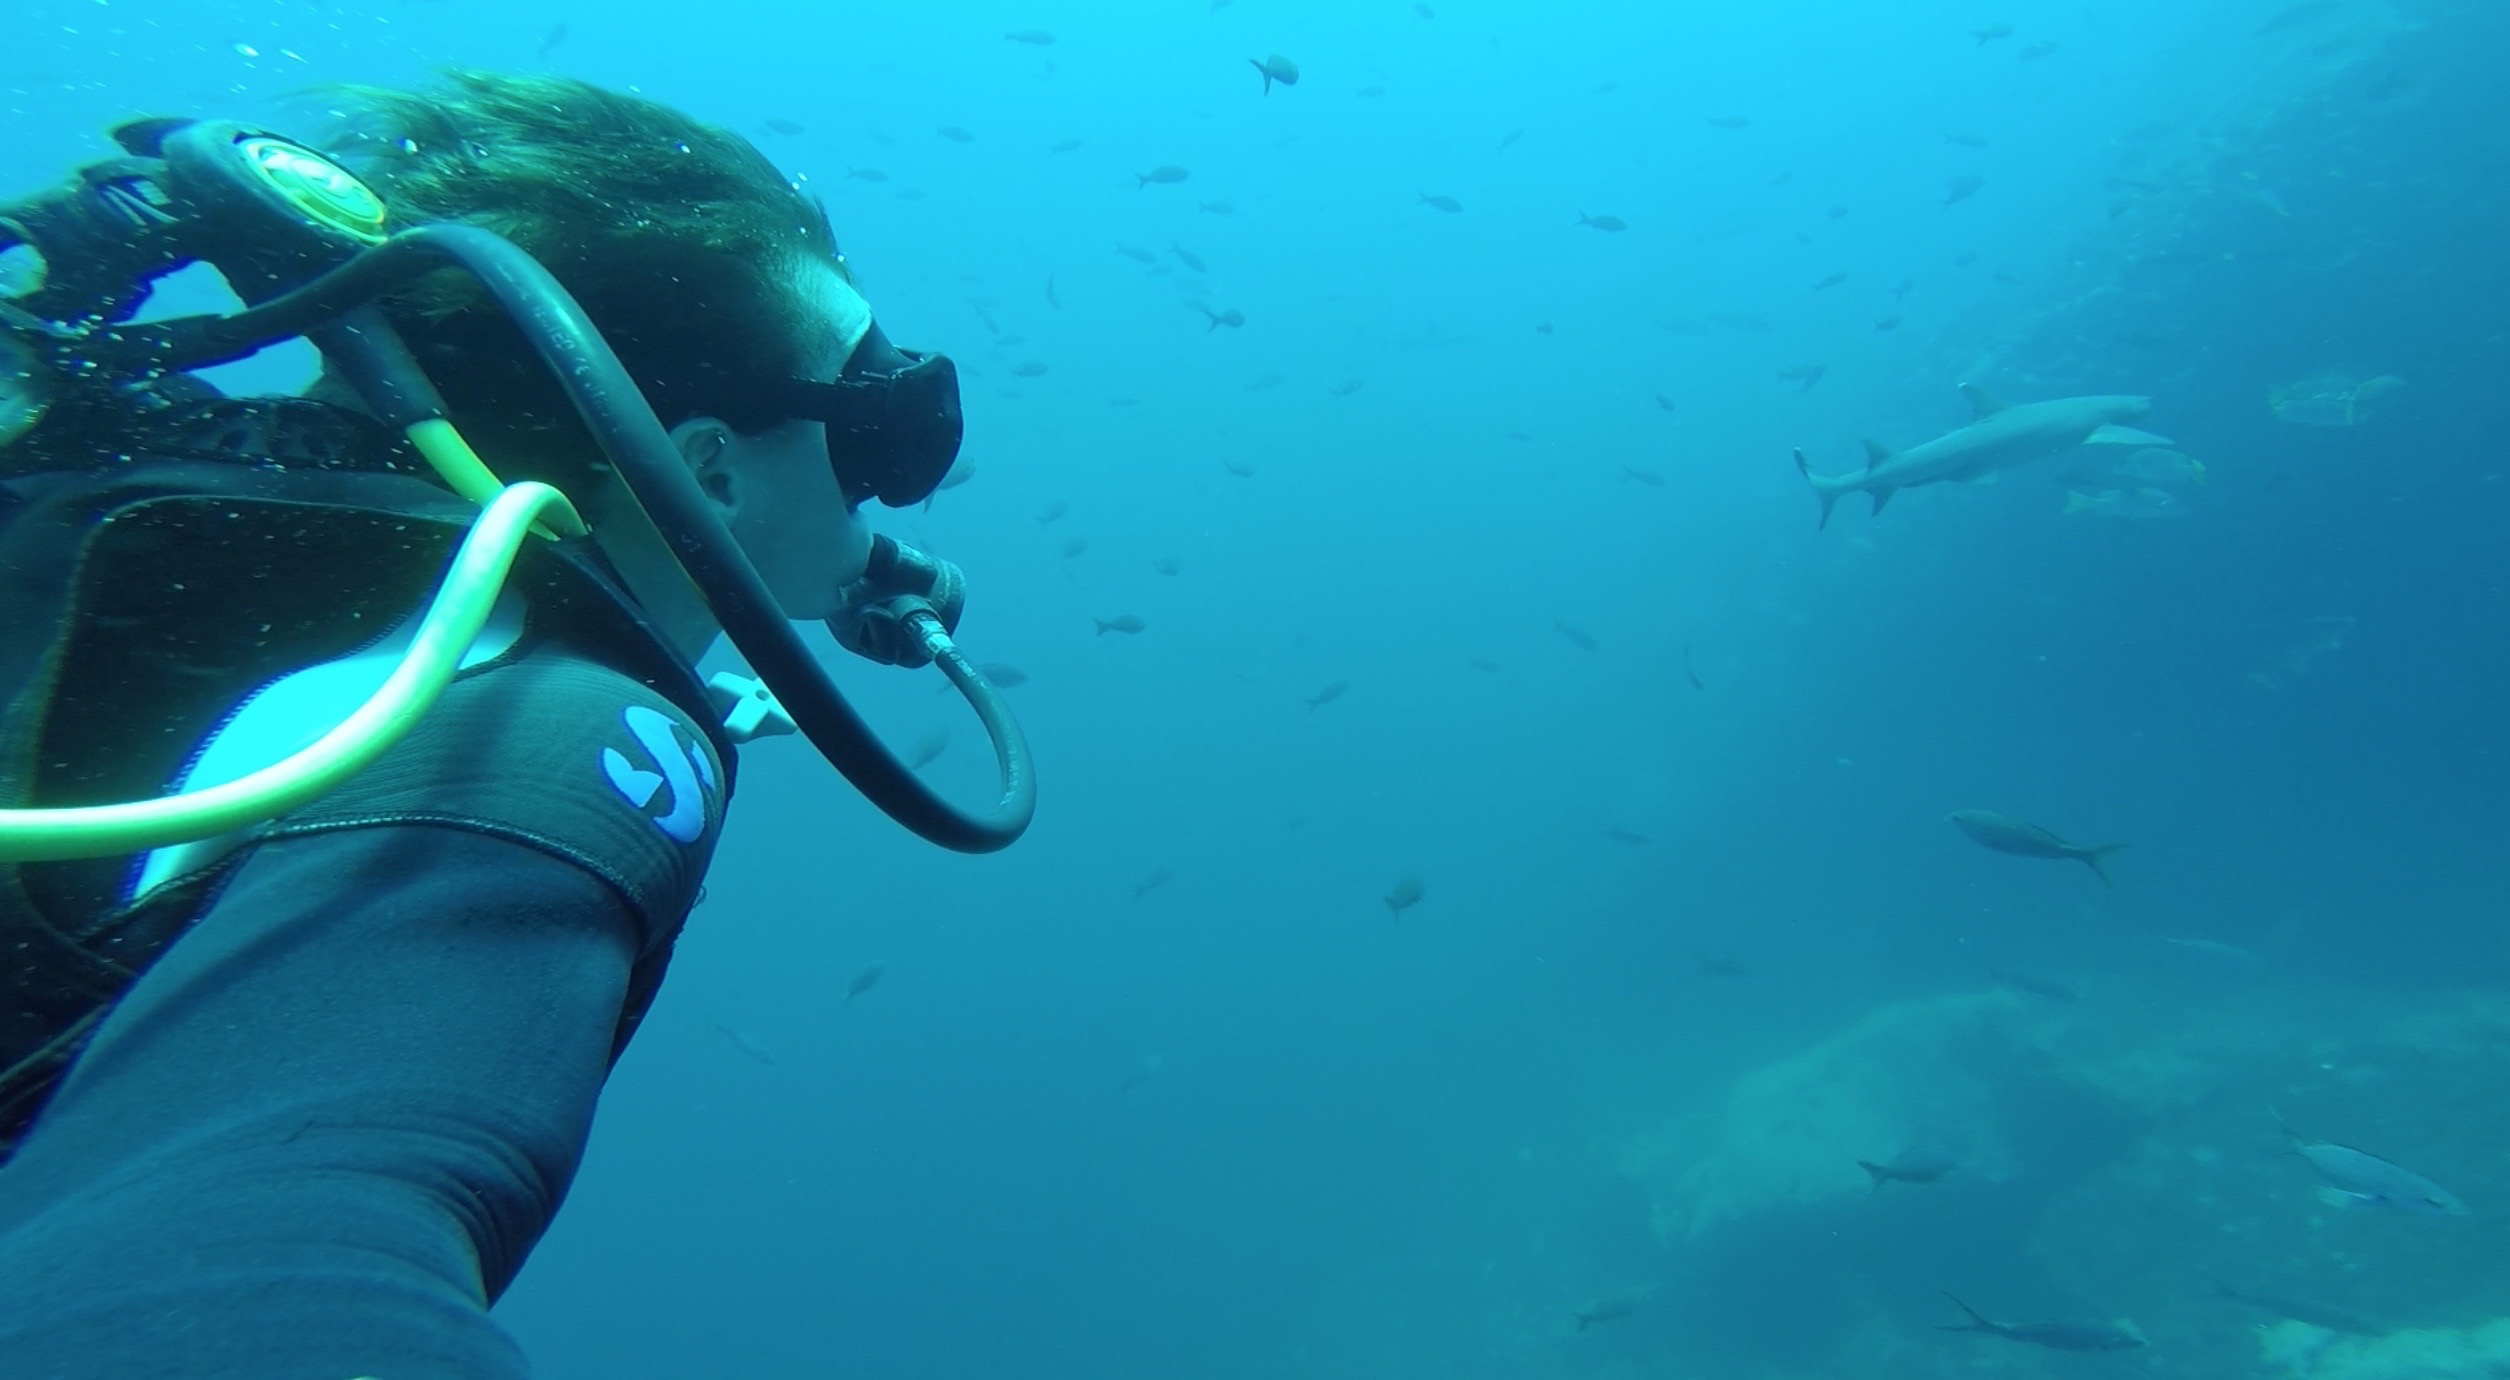 David Simpson diving with sharks in Galapagos, Ecuador. Swimming with sharks in the Galapagos